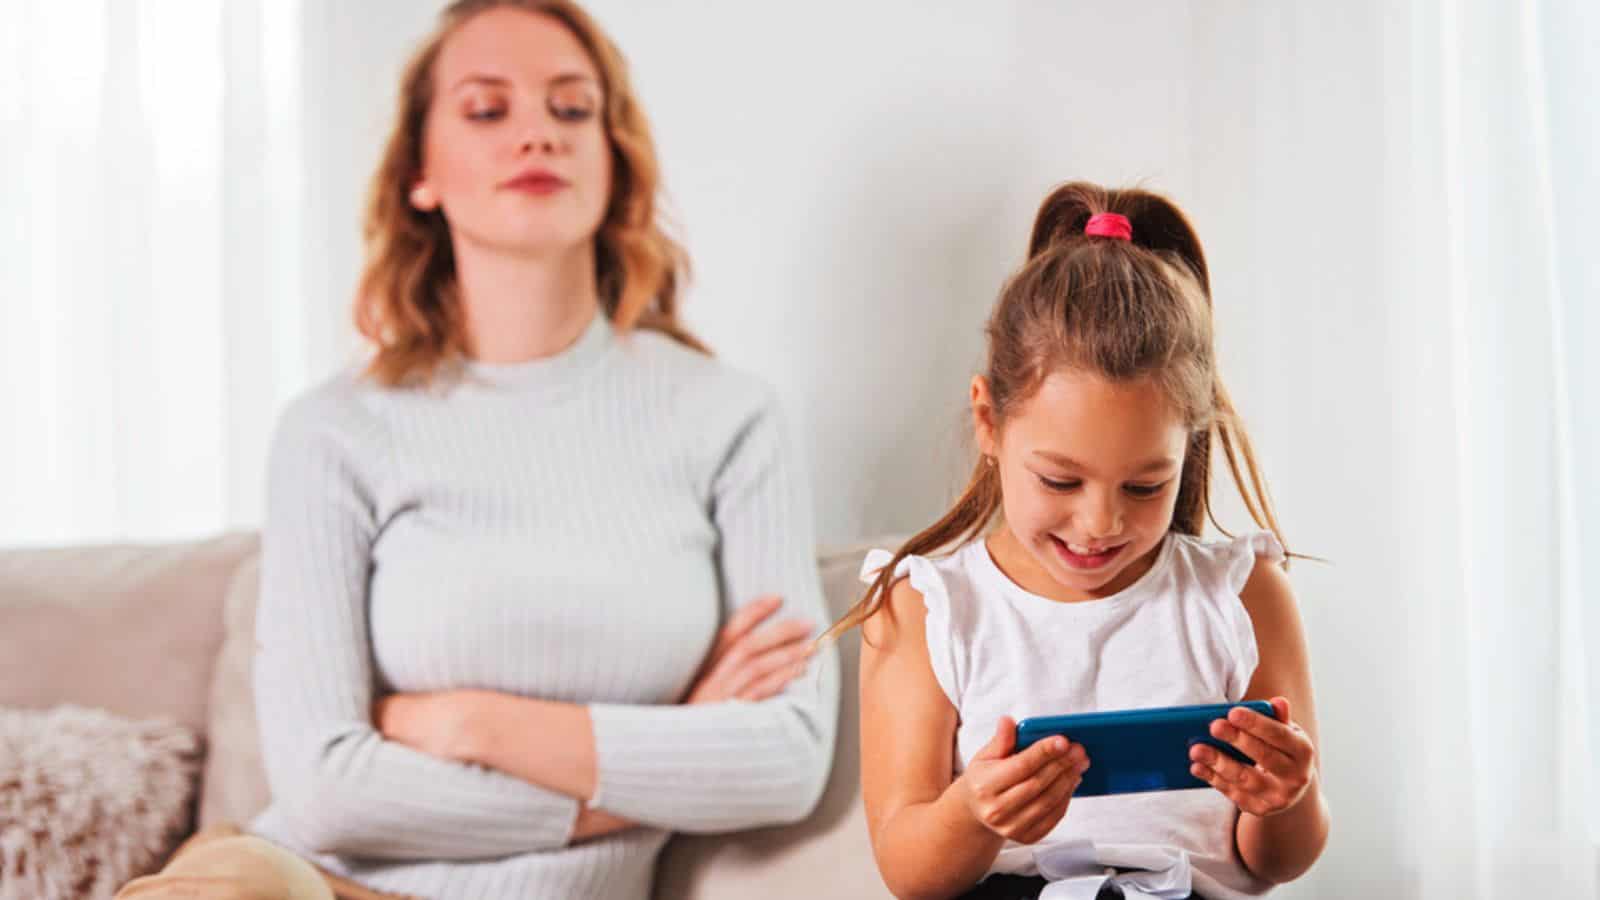 Daughter using a smartphone, while frustrated mother is watching her